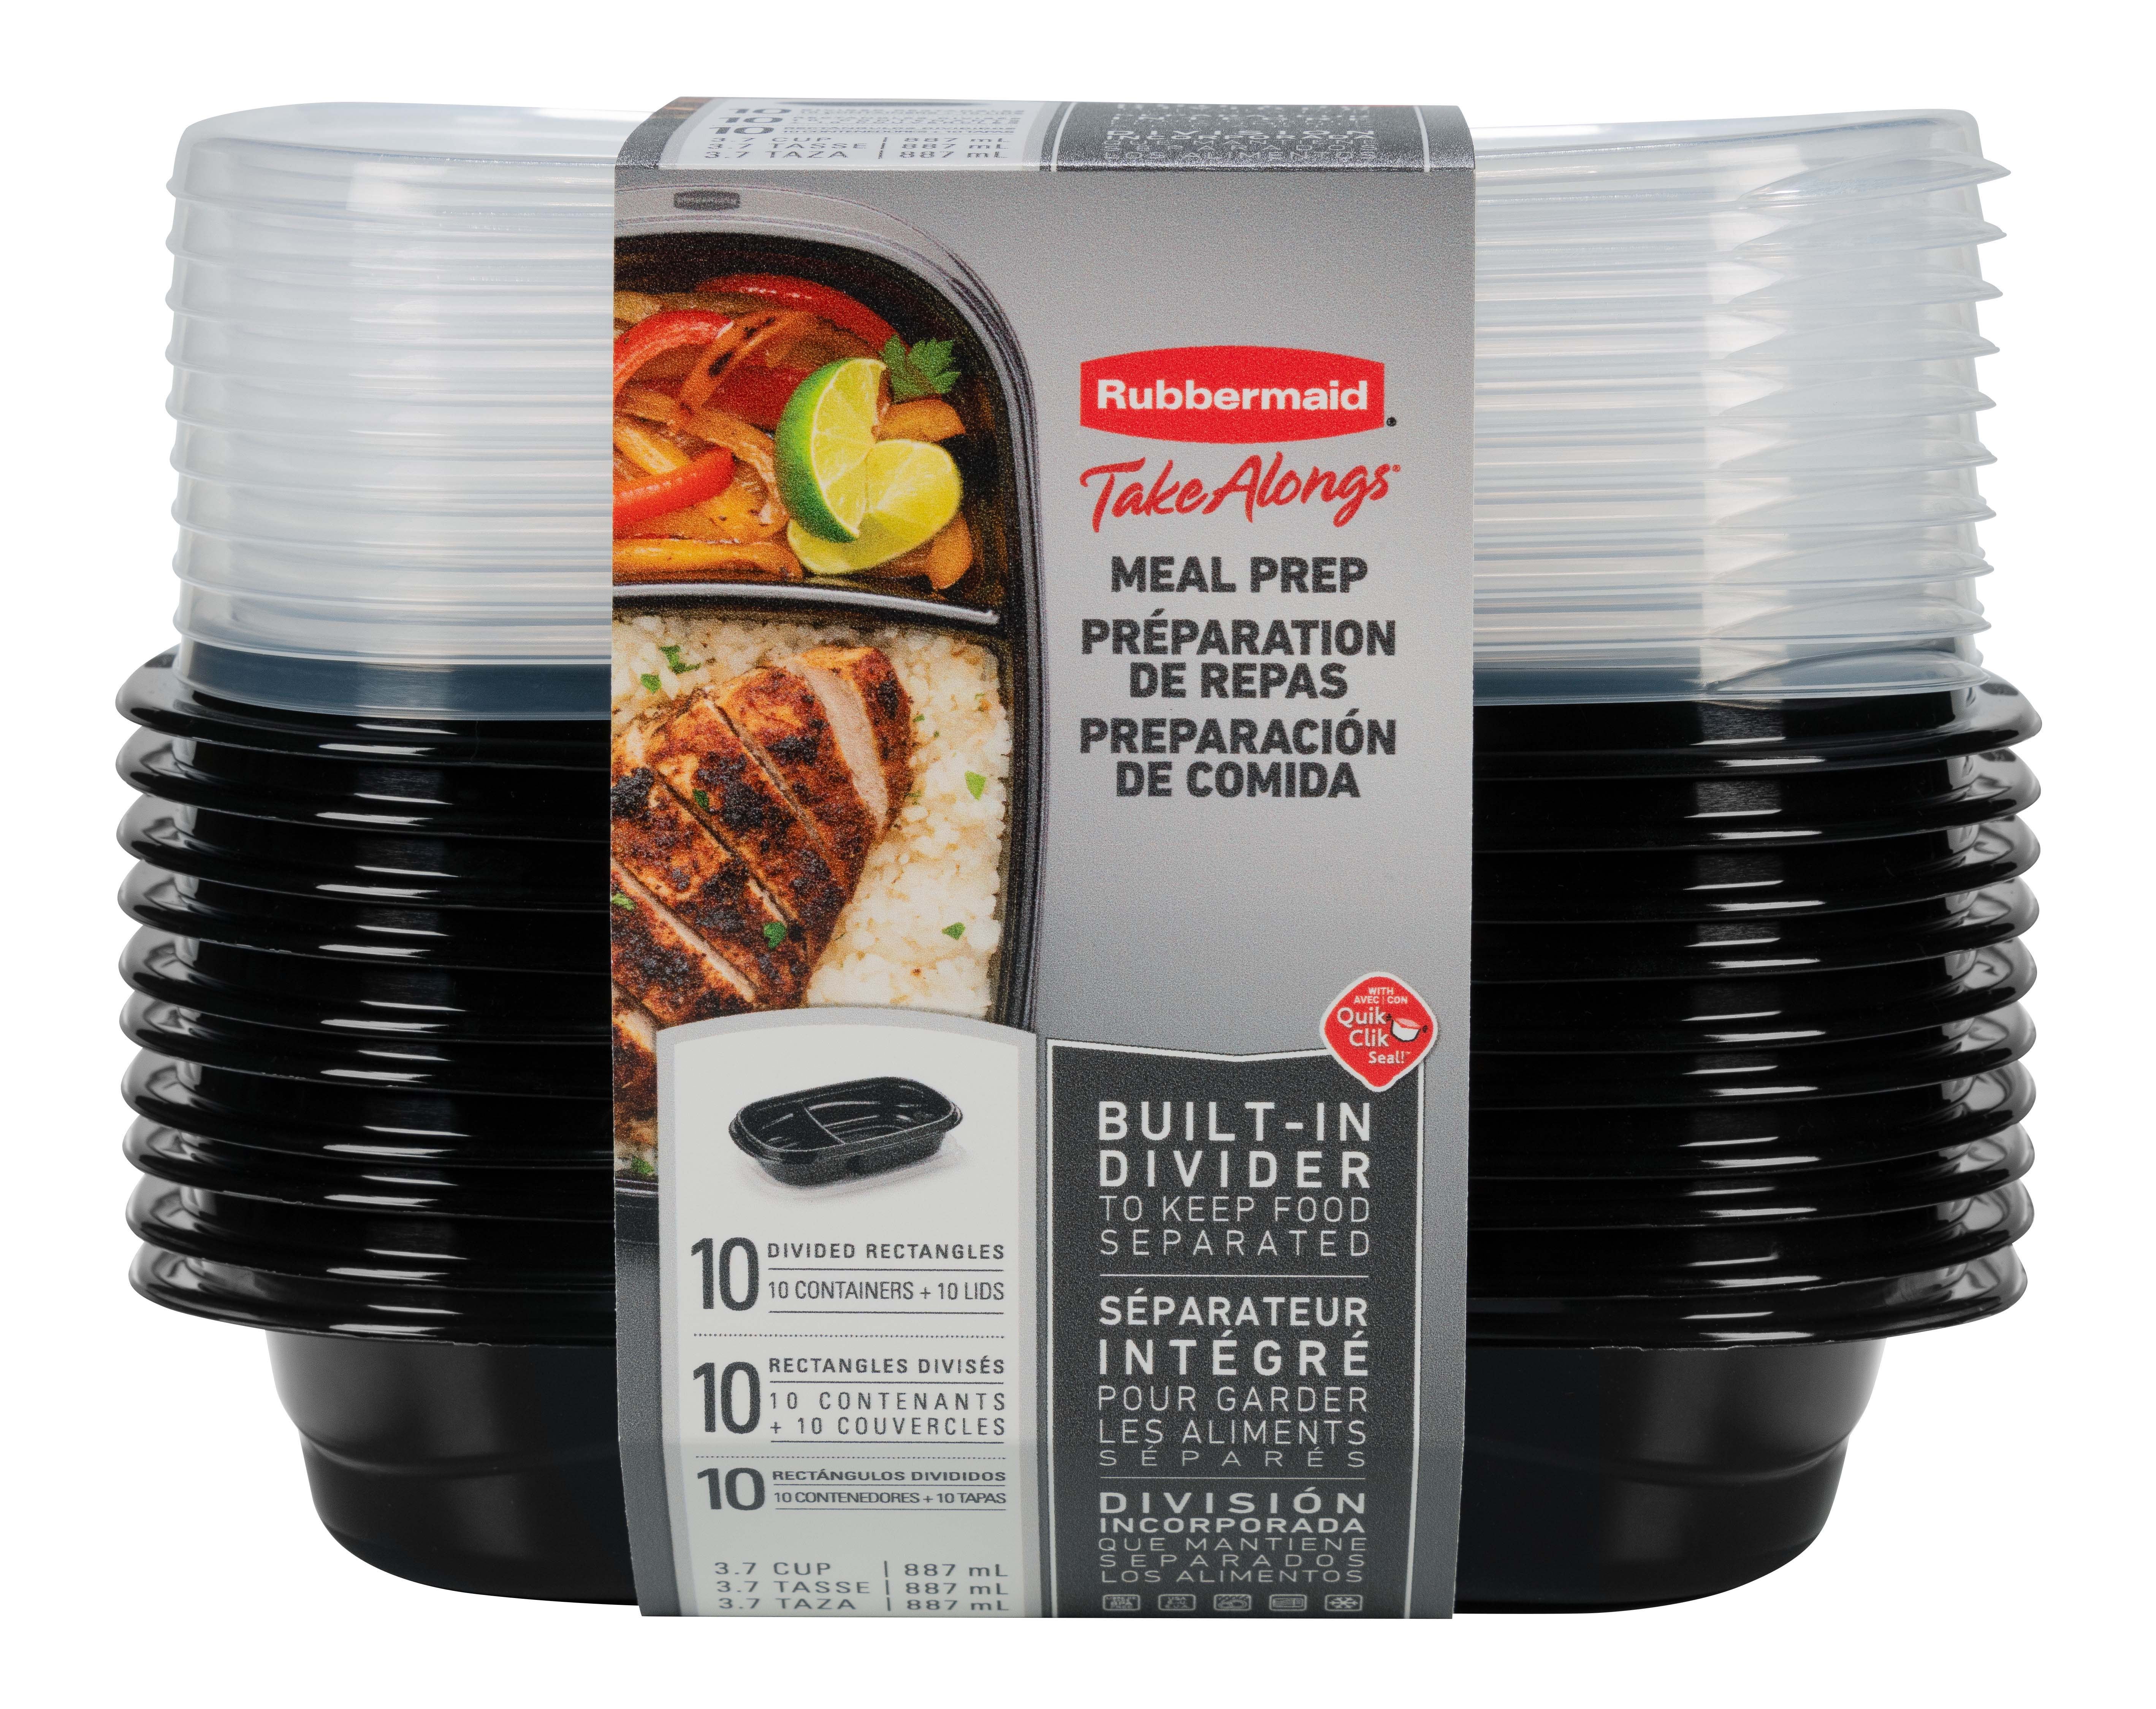 Rubbermaid TakeAlongs, 3.7 Cups, Meal Prep Food Storage Container with  Built-In Divider, 20 Pieces